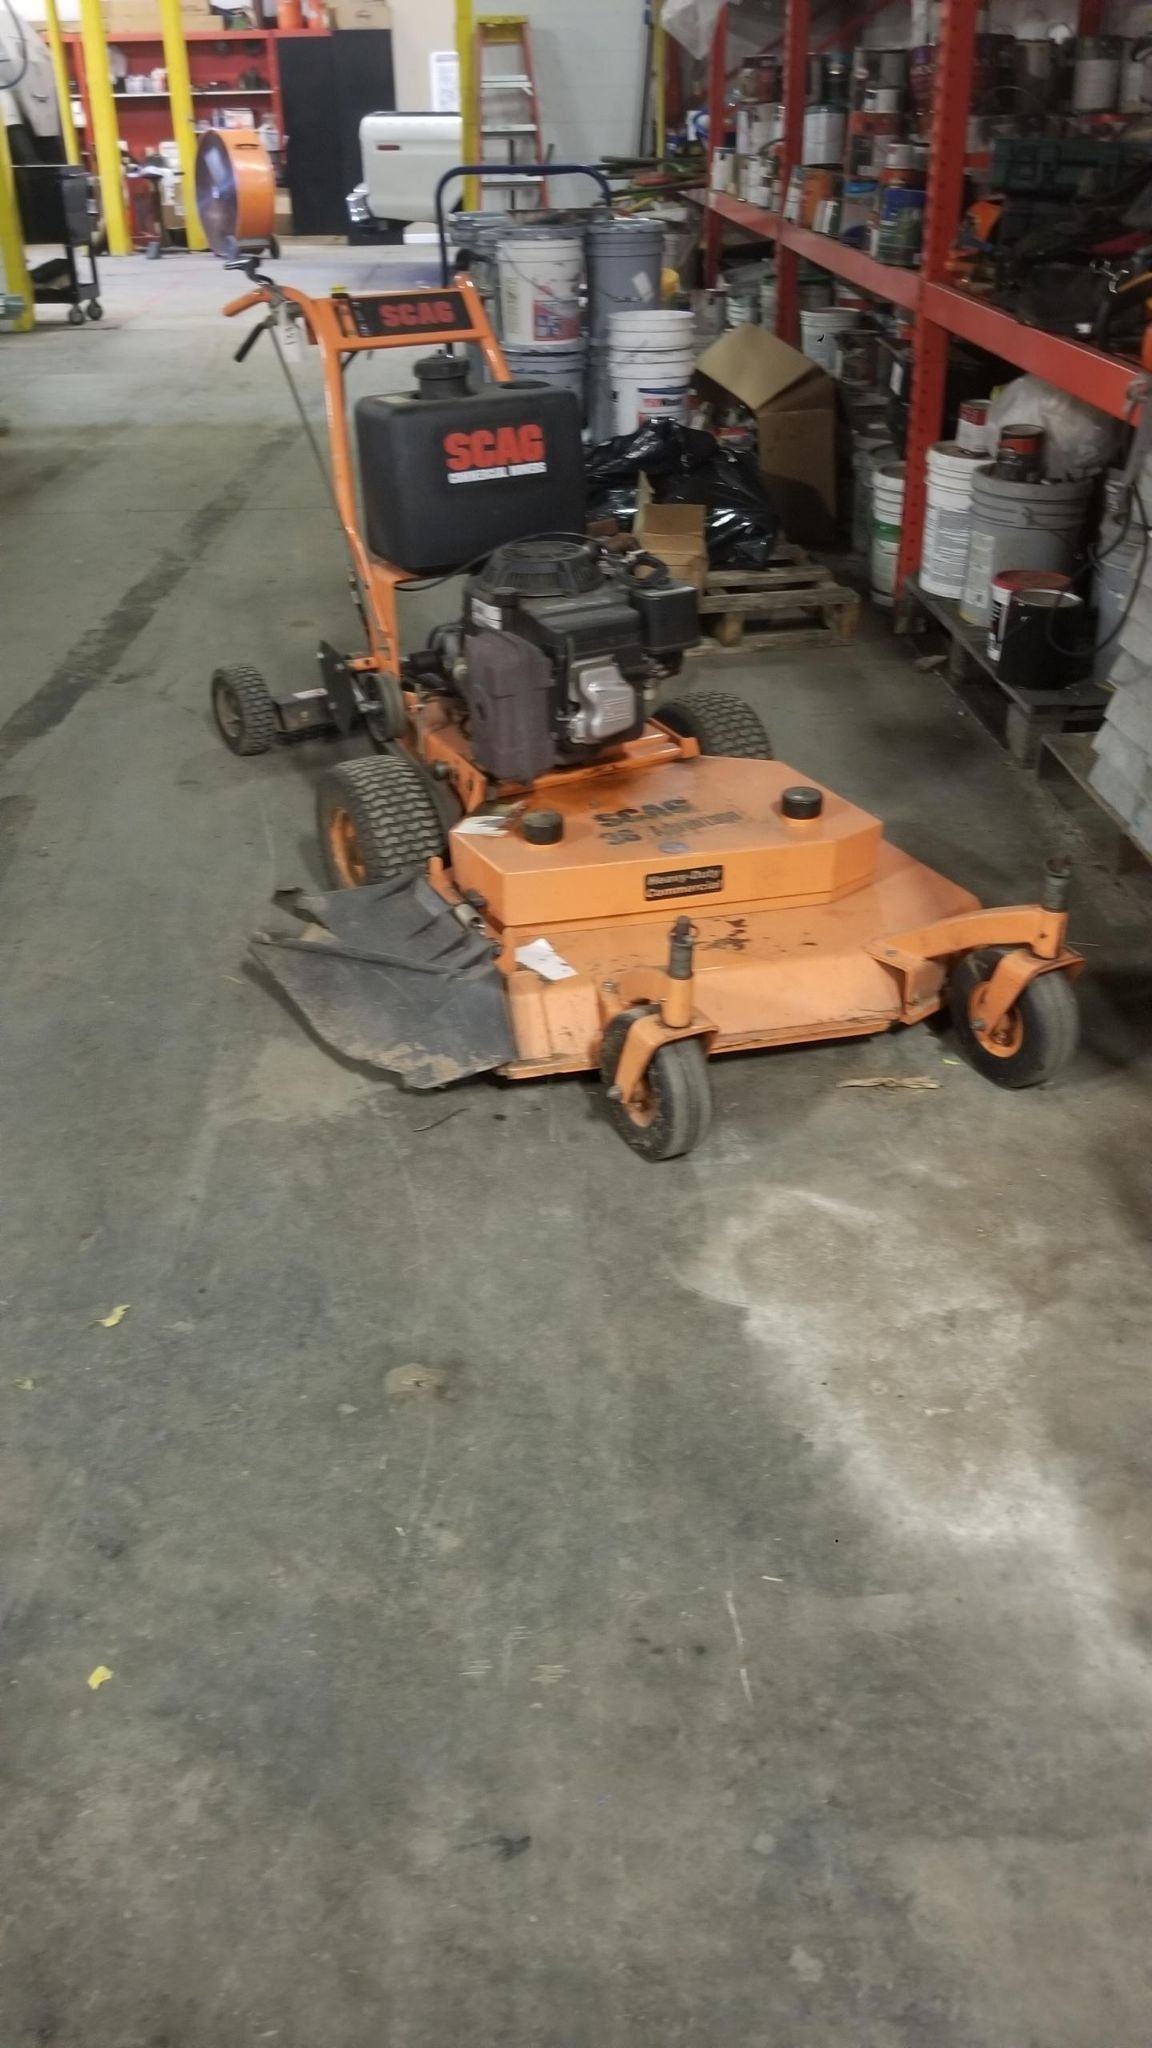 Commercial lawn mower for sale.